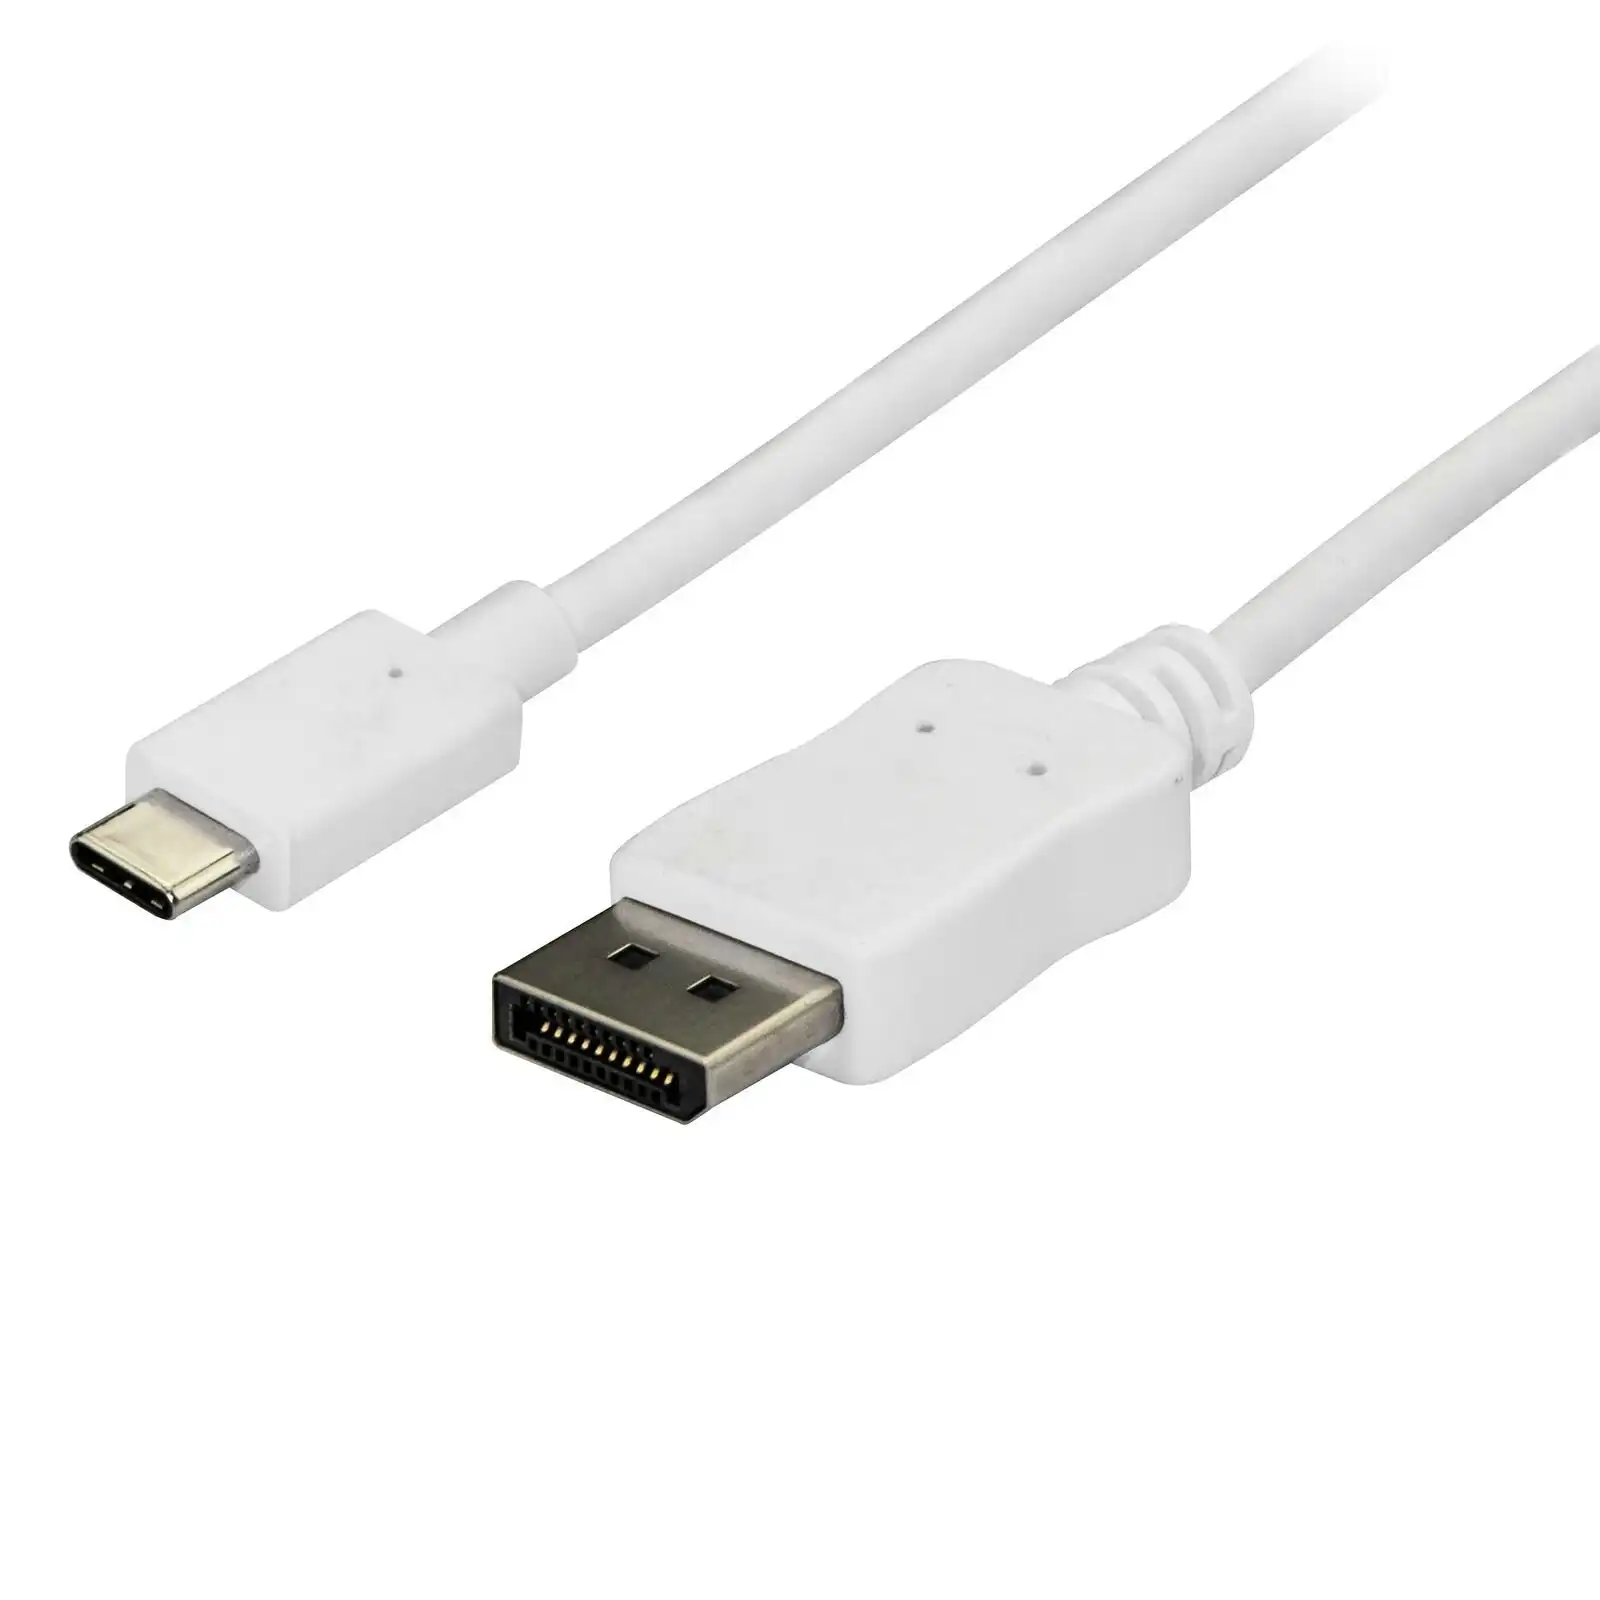 Star Tech 1.8m WHT USB C To DisplayPort 1.2 Cable 21.6Gbps 4K/60Hz For PC/Laptop